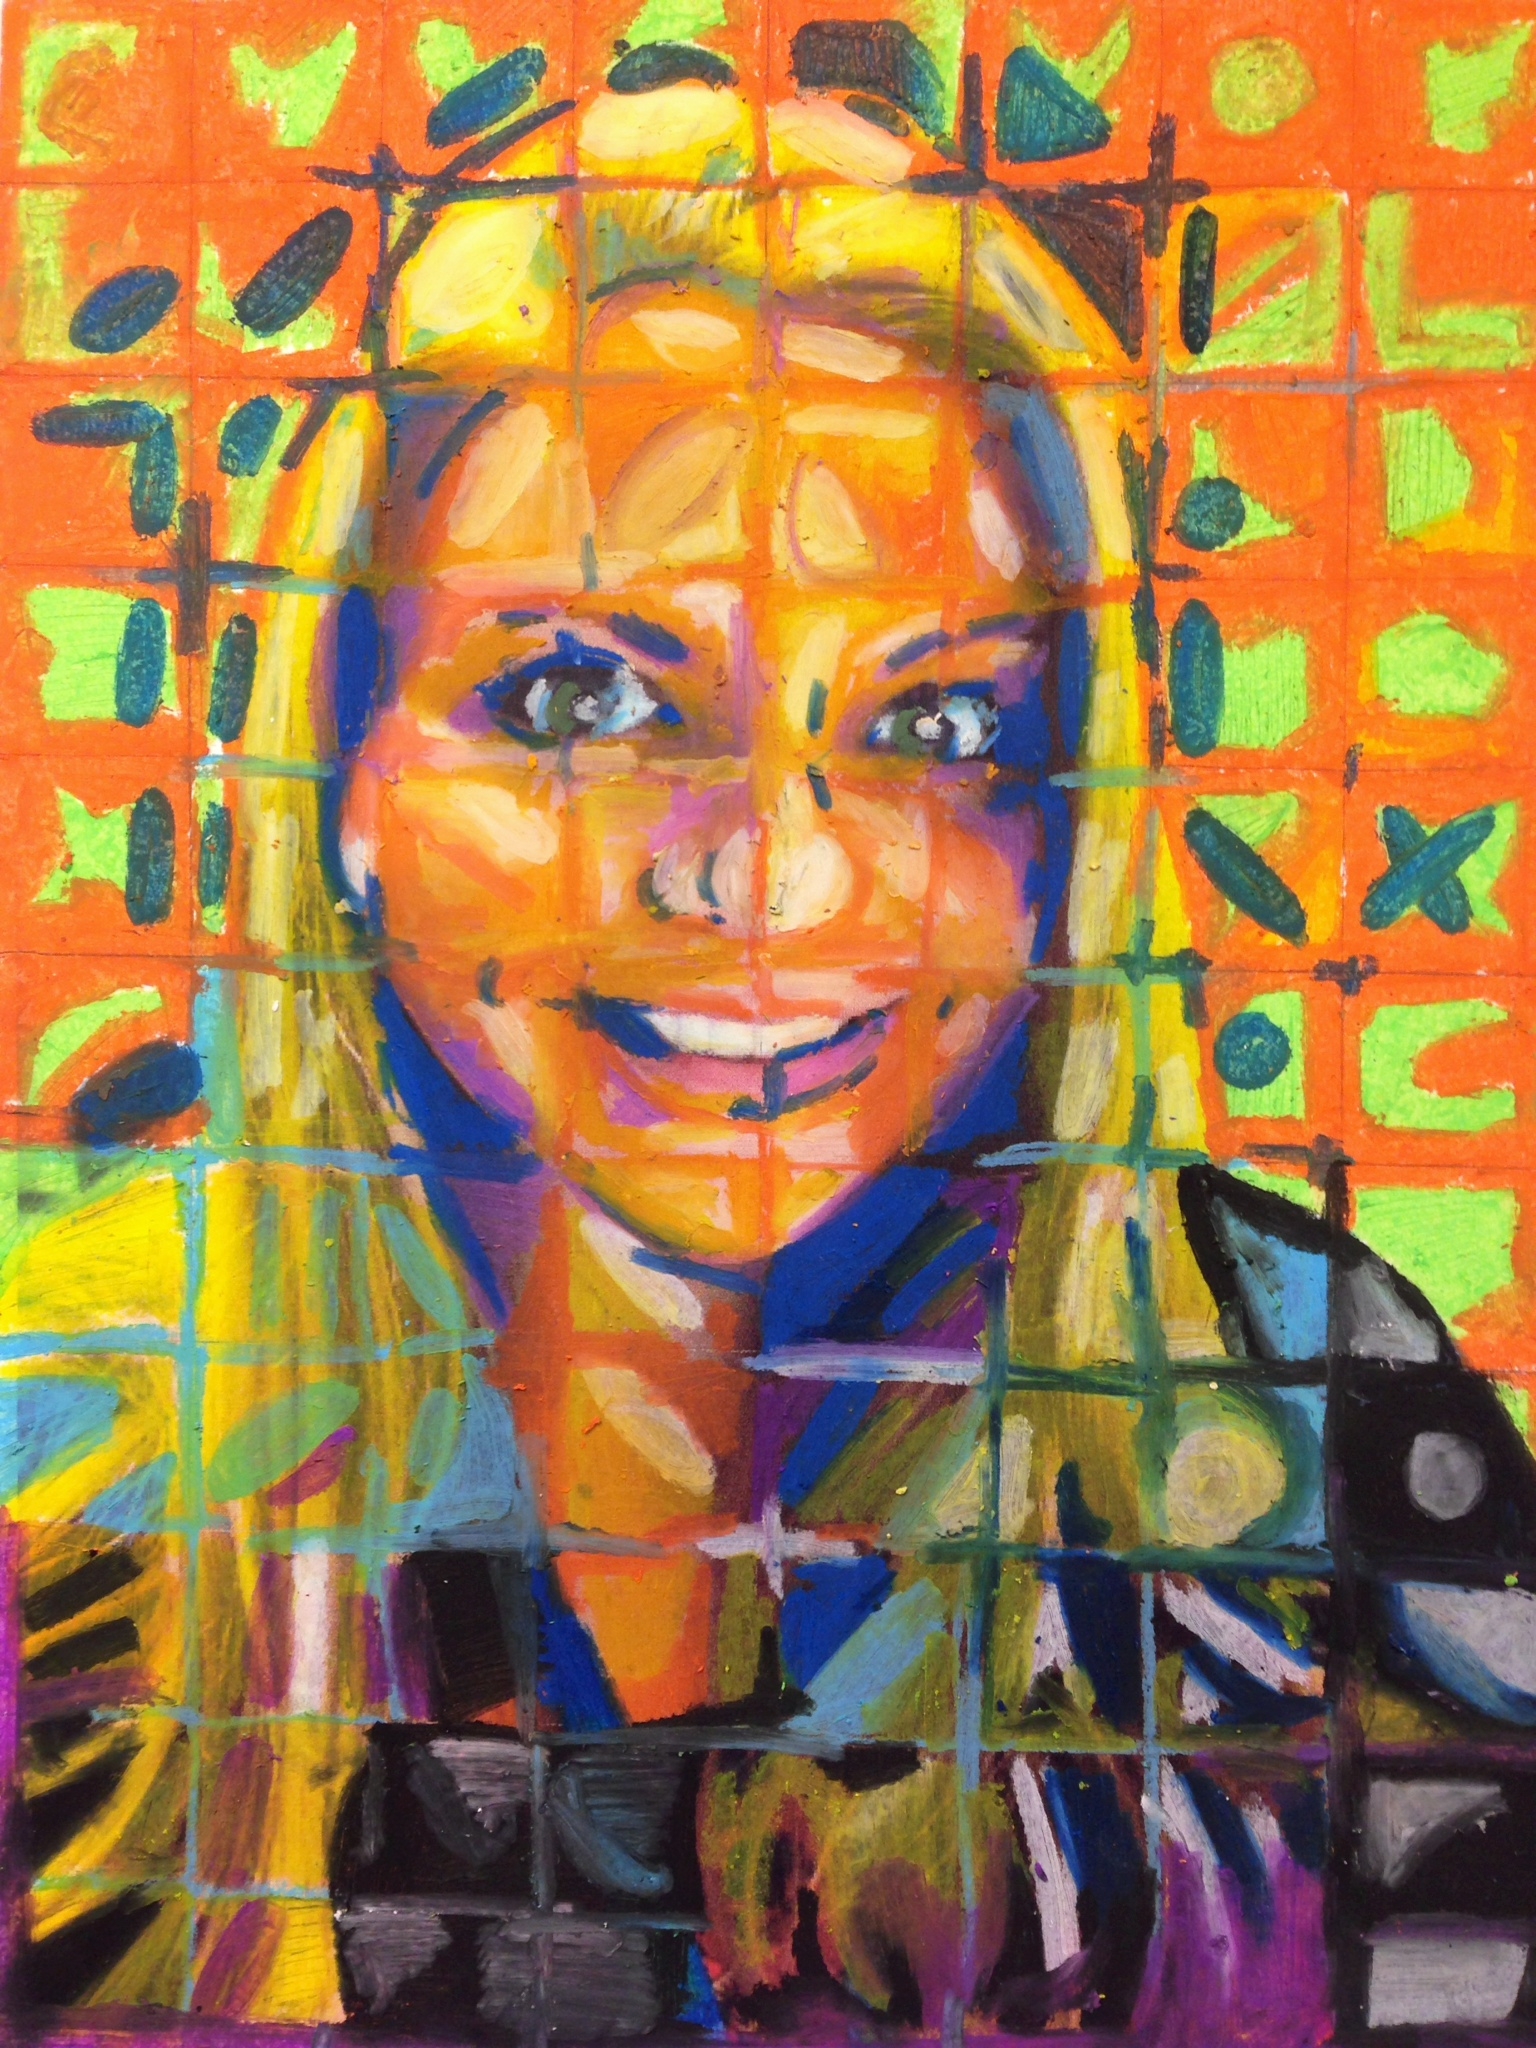 Grid-style portrait of a young woman drawn in pastel